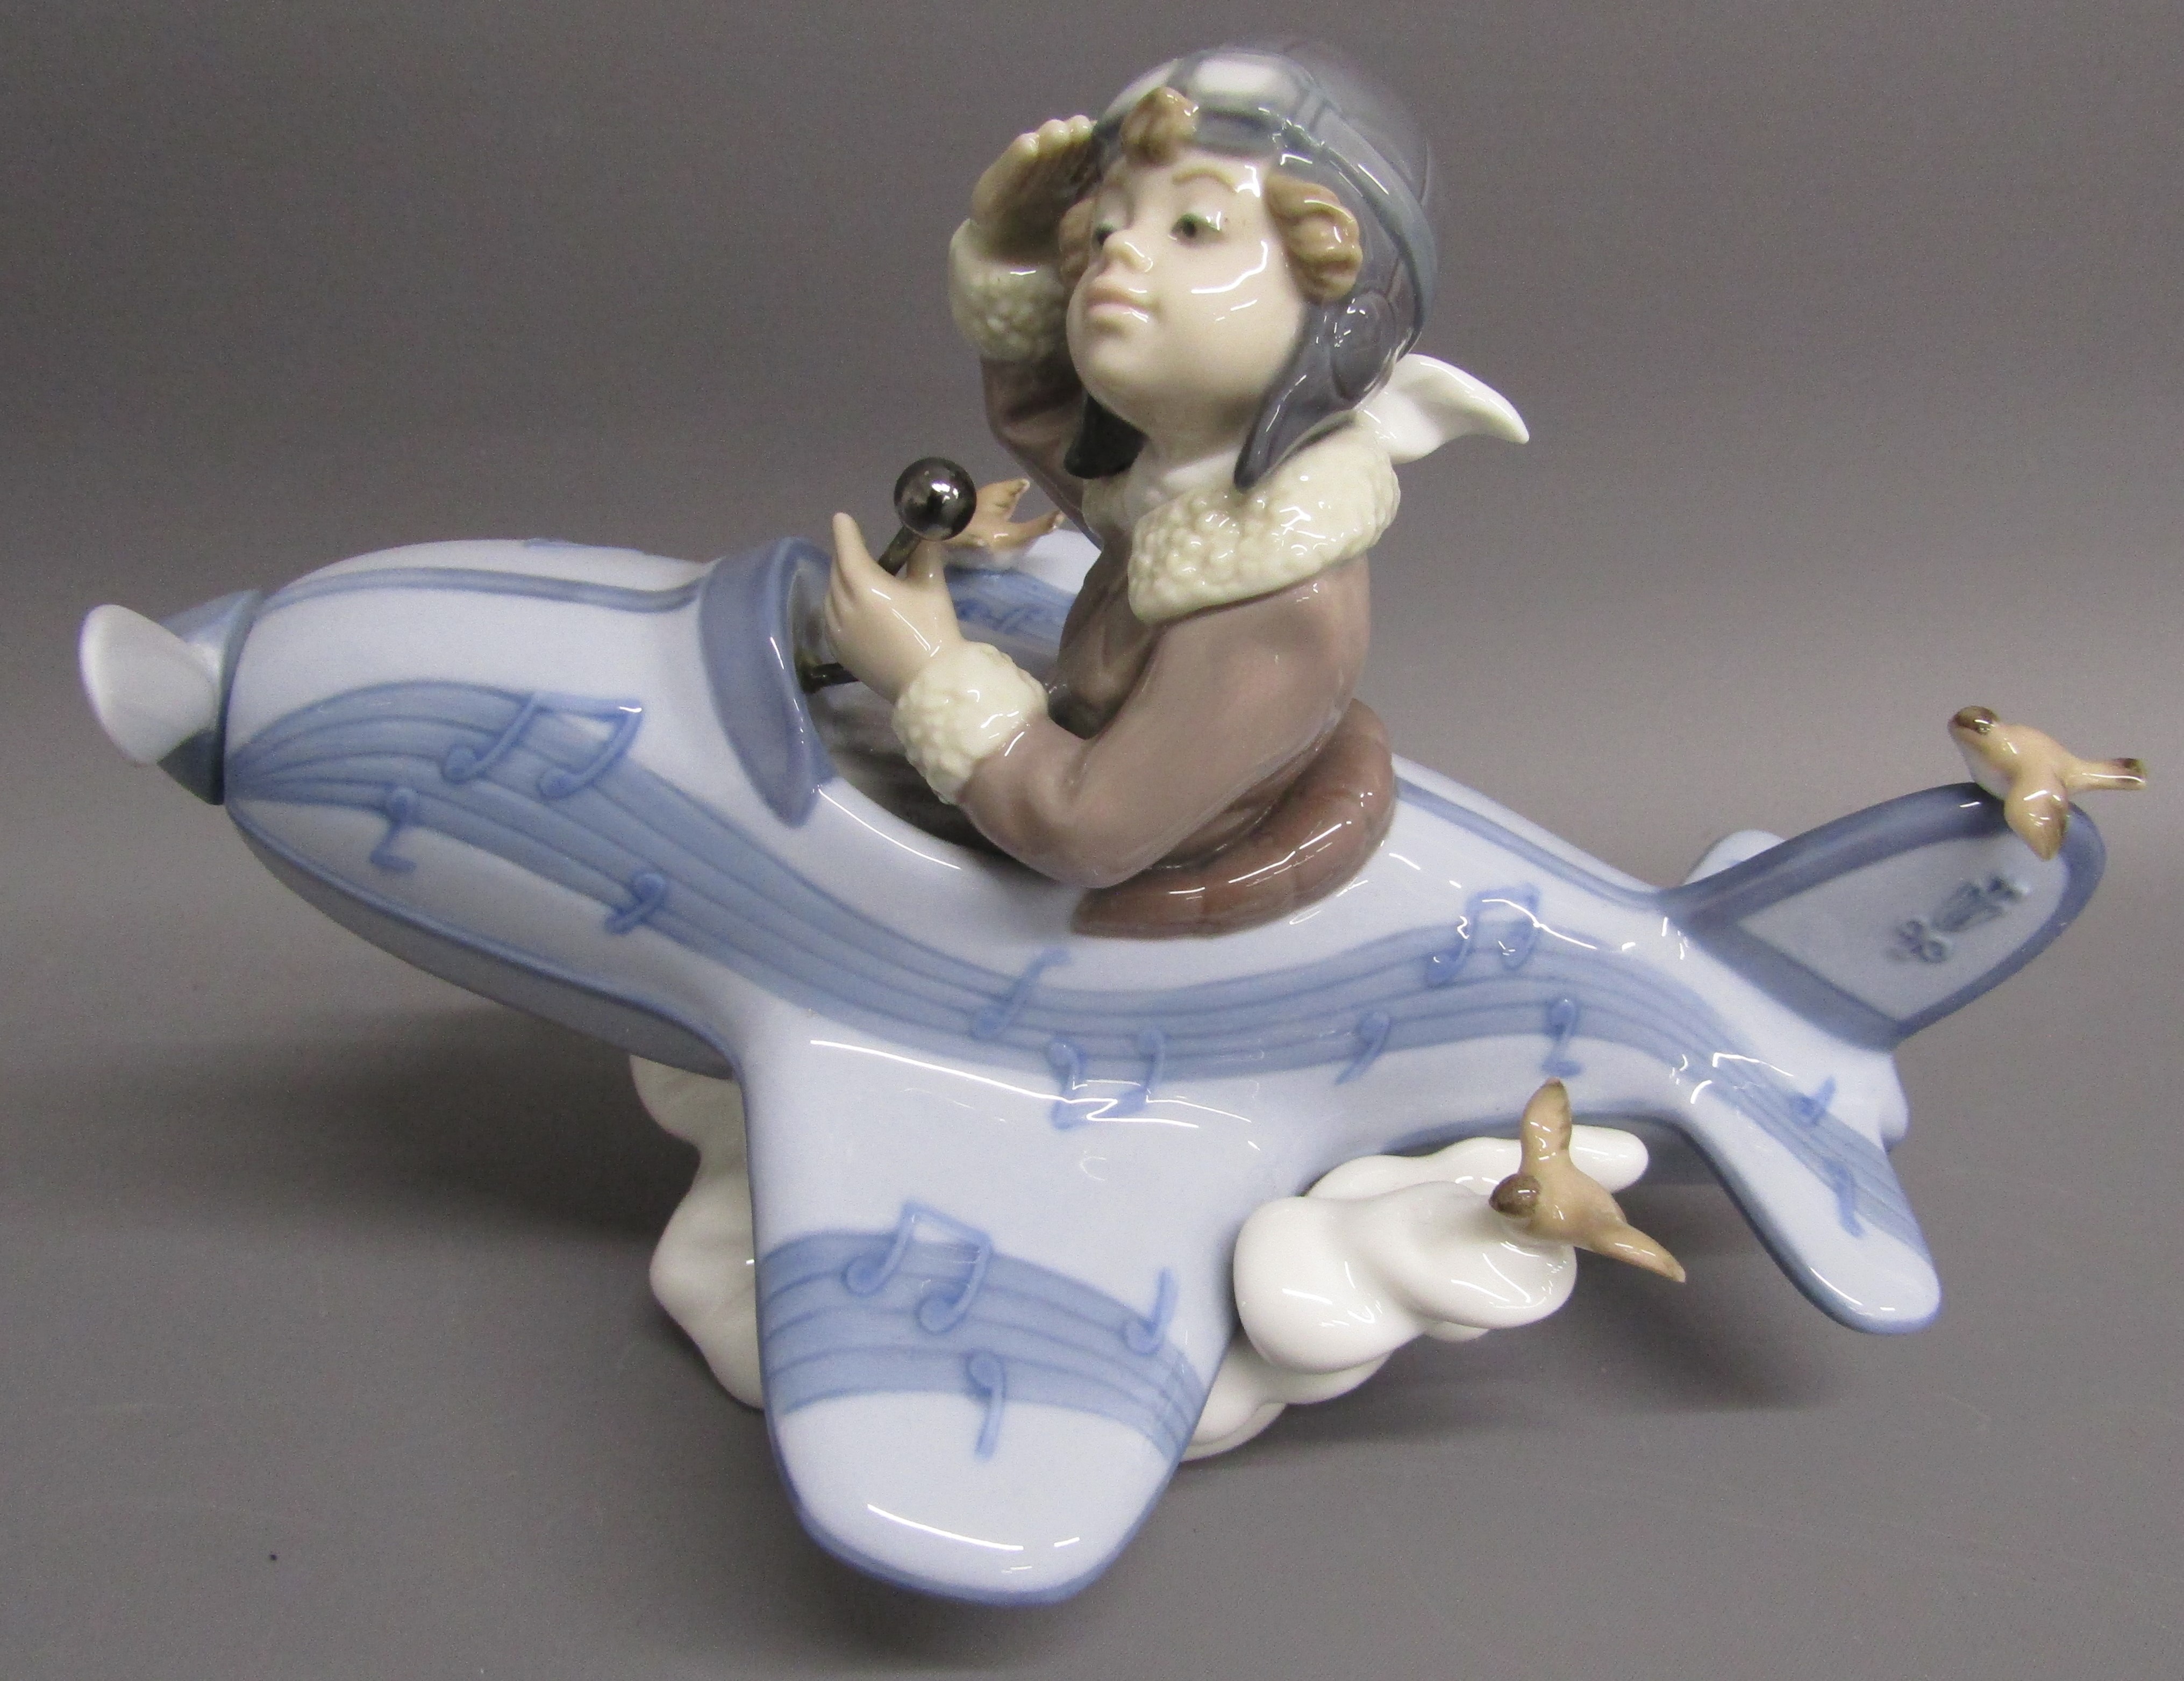 Lladro 'Over the Clouds' 05697 - with box - Image 2 of 6